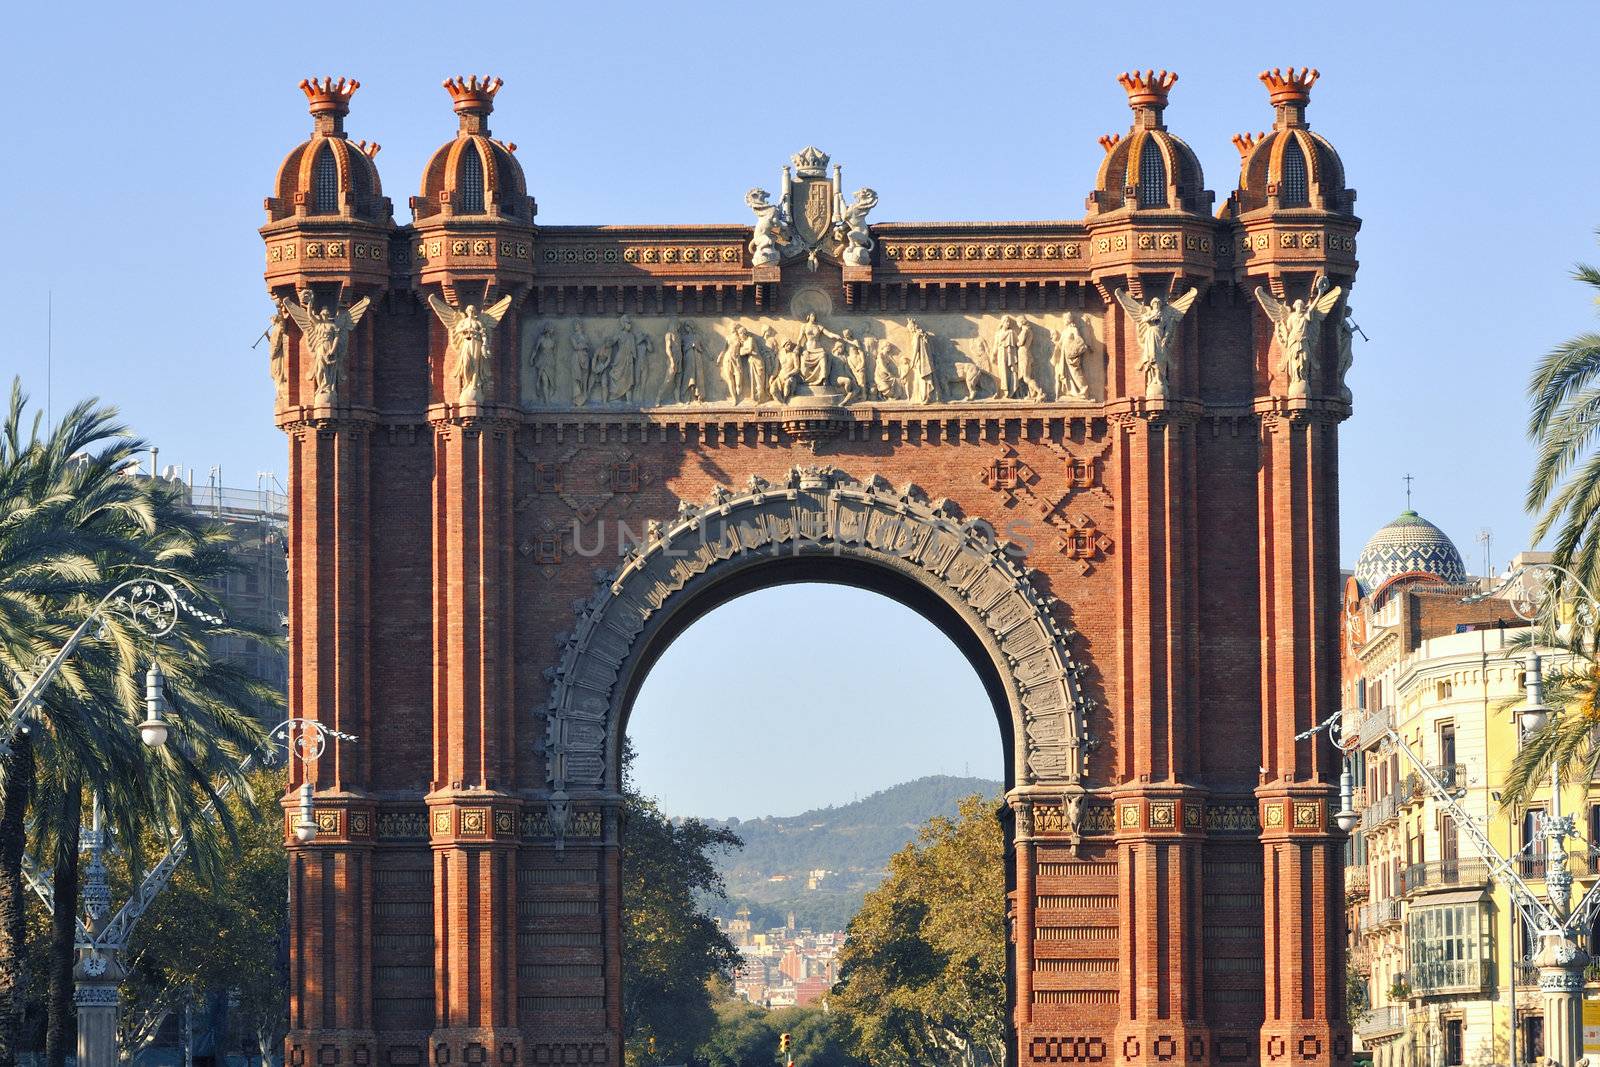 famous Arc de Triomf built for the 1888 Universal exhibition in Barcelona, Spain